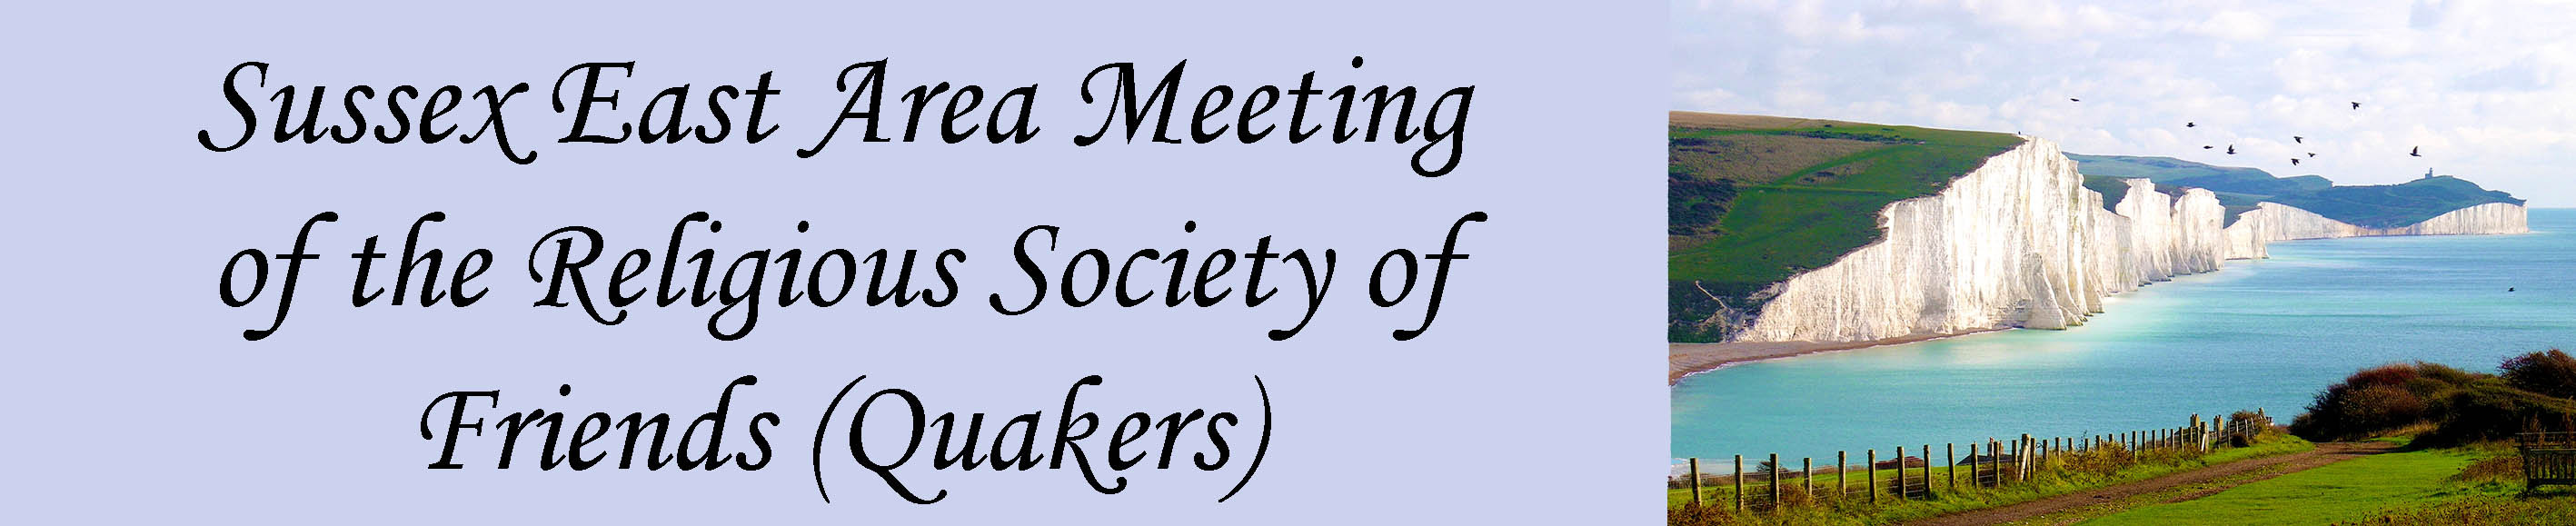 Sussex East Area Meeting of the Religious Society of Friends (Quakers)